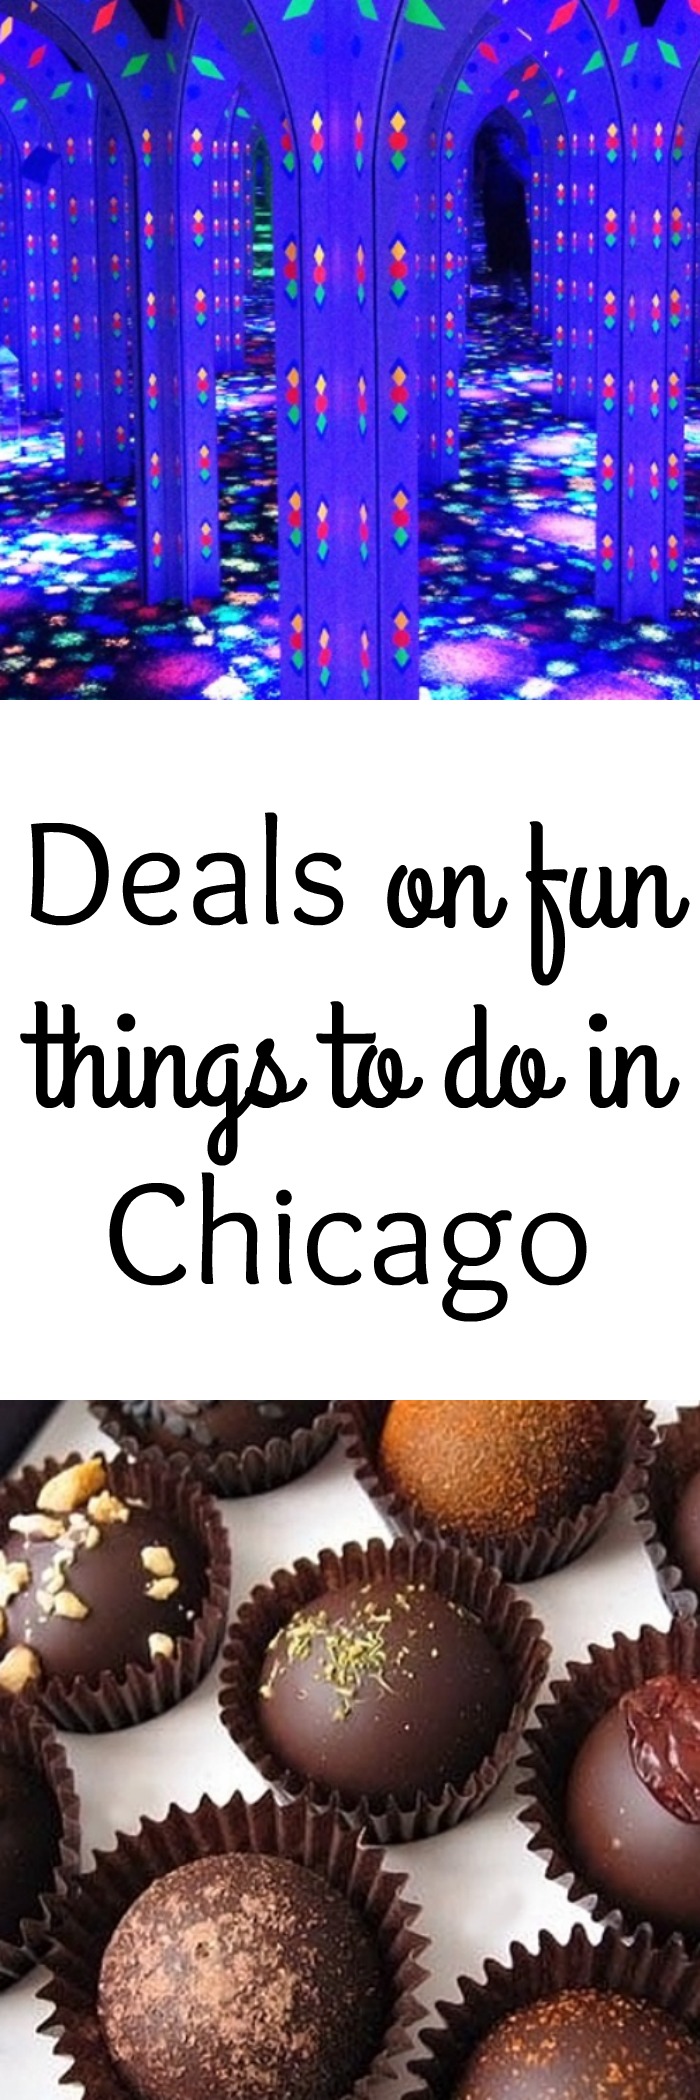 Looking for things to do in Chicago? We have some great deals to help you have fun in Chicago this weekend. Fun doesn't have to break the bank.